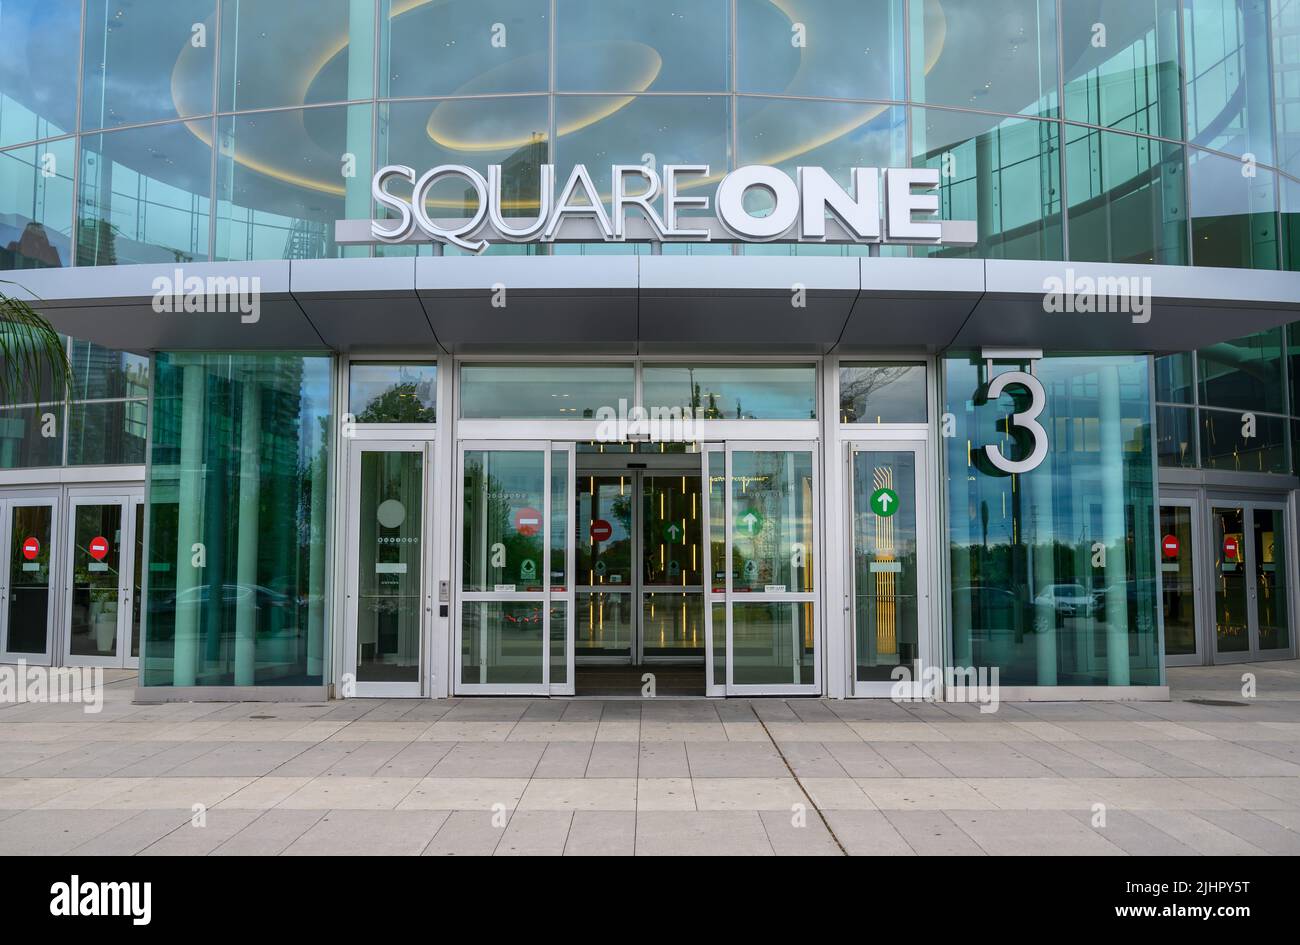 Square One Shopping Centre, Mississauga, is the largest shopping mall in Ontario, Canada. Stock Photo